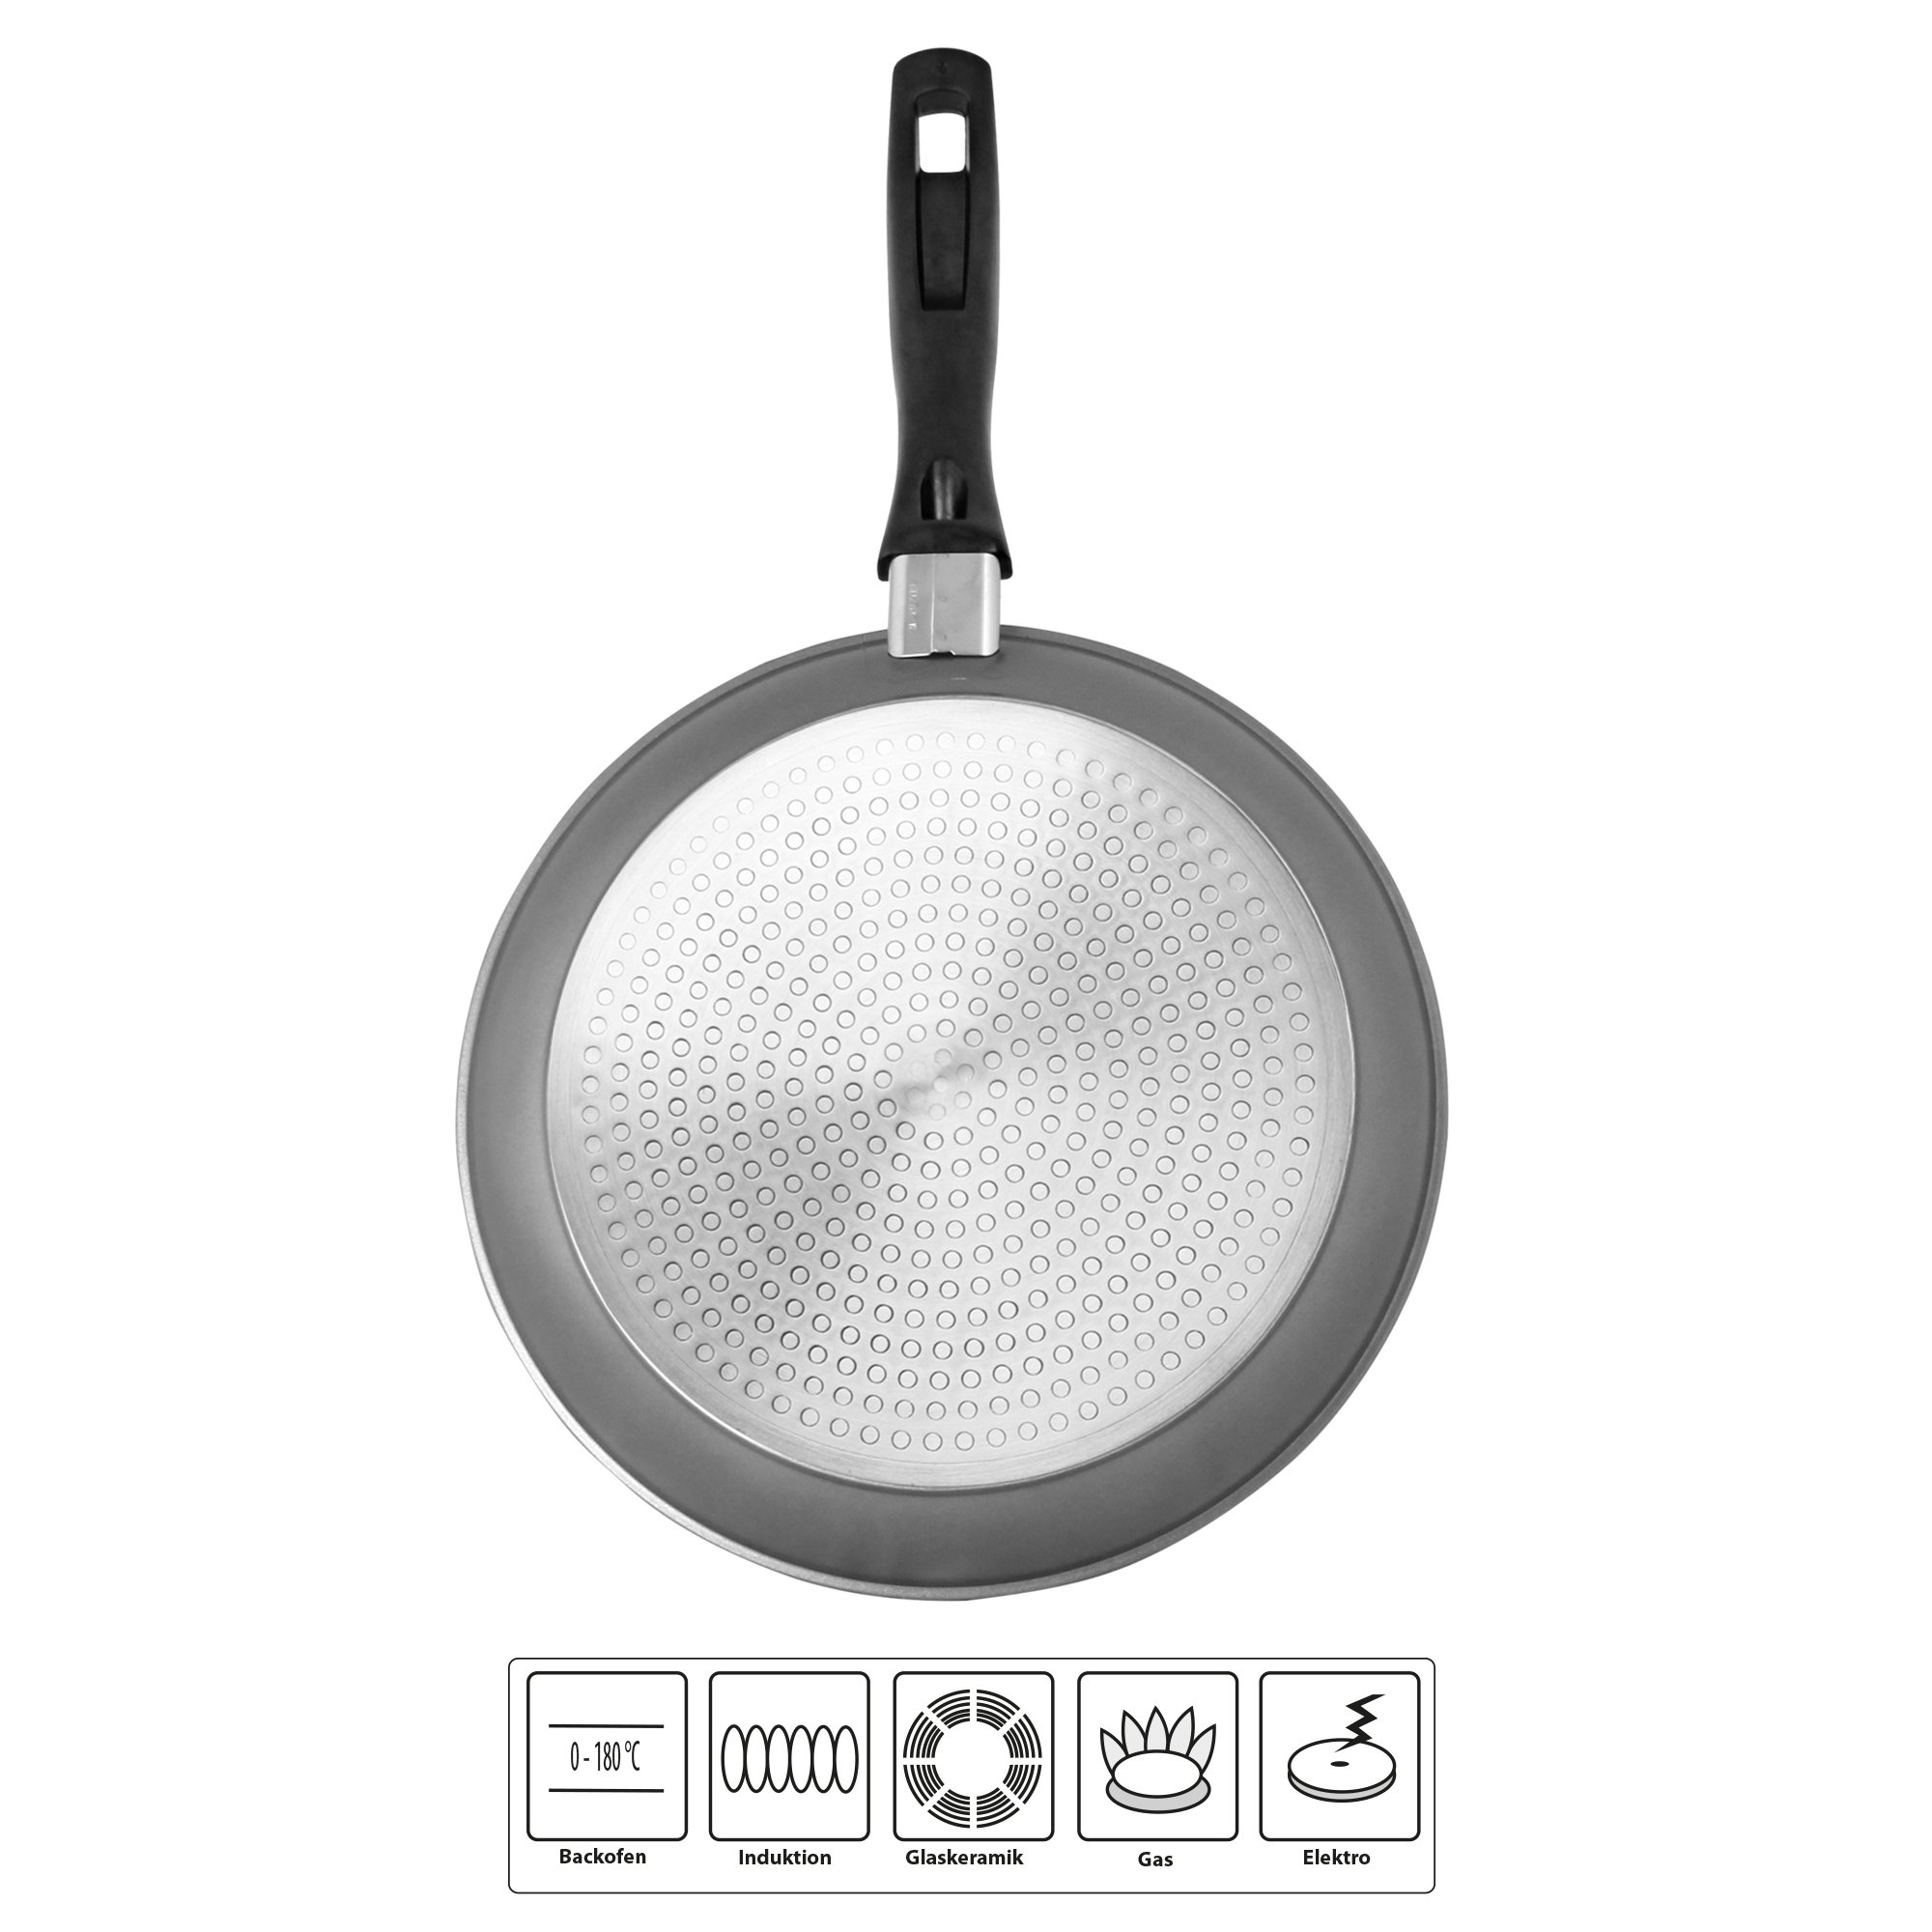 STONELINE® Frying Pan 26 cm, with Lid, Non-Stick Pan | CLASSIC